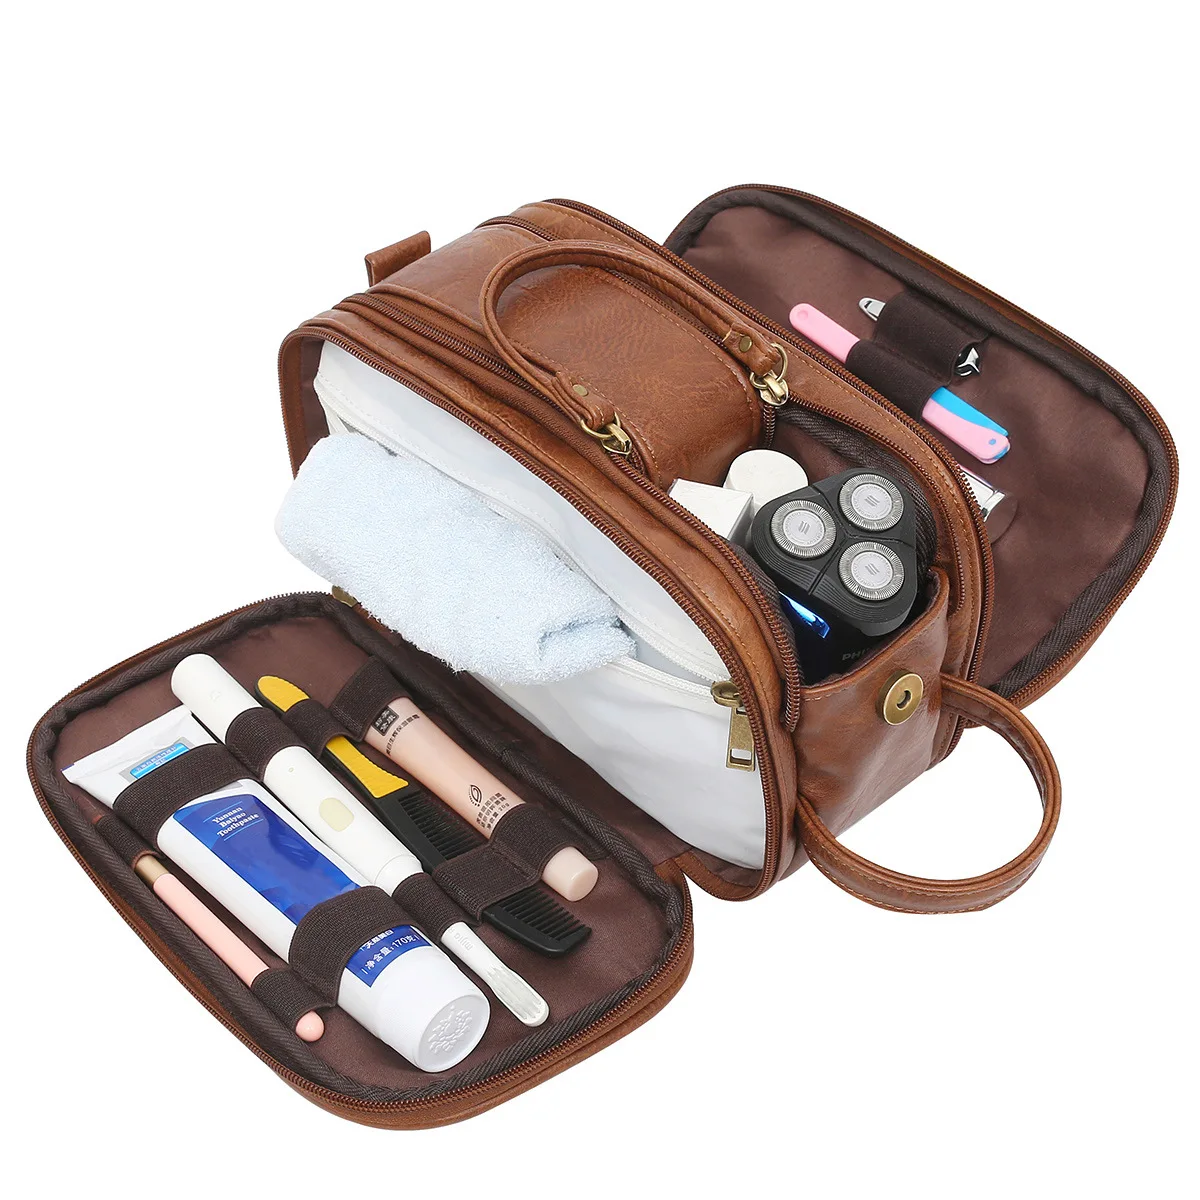 

Hot Sale Toiletry Bag for Men PU Leather Cosmetic Bags Large capacity shaving bag Leather Travel Organizer Kit